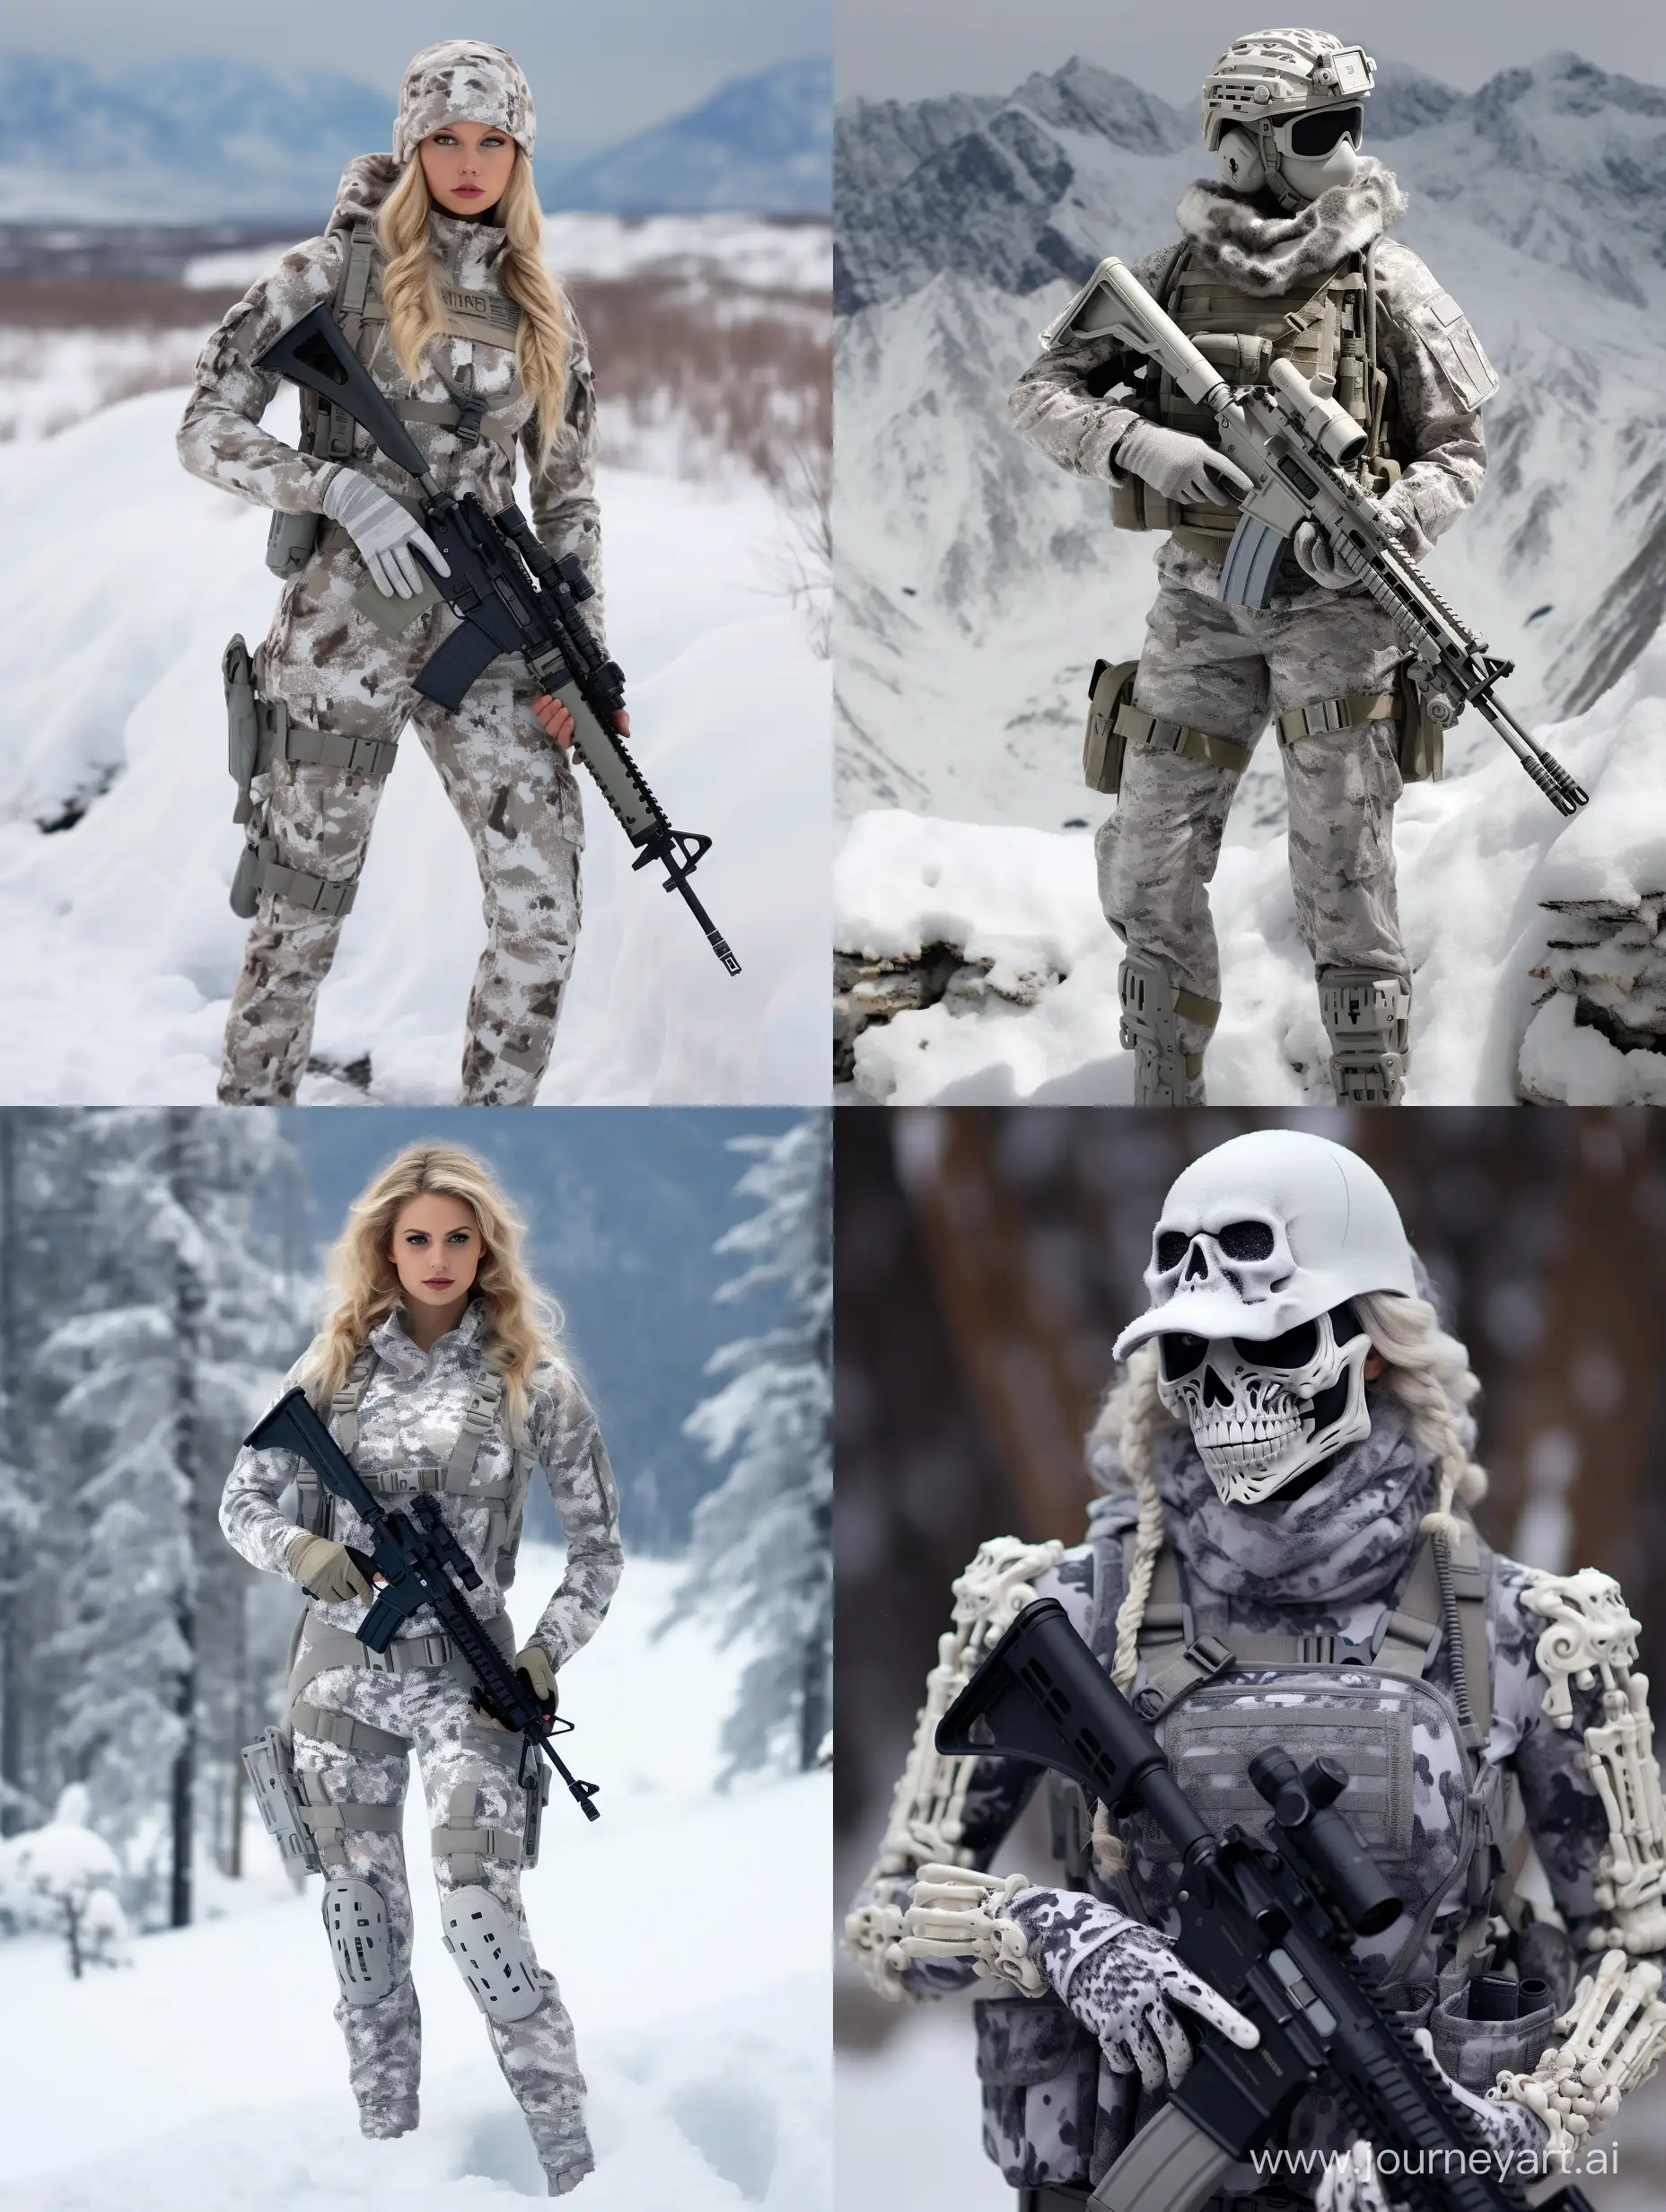 deep sky grey in uniform, snowman girl 32-year-old, full body, military camouflage tight leggings, Photos 8K, highly detailed, modern Star Wars military uniform private, solo, no weapon